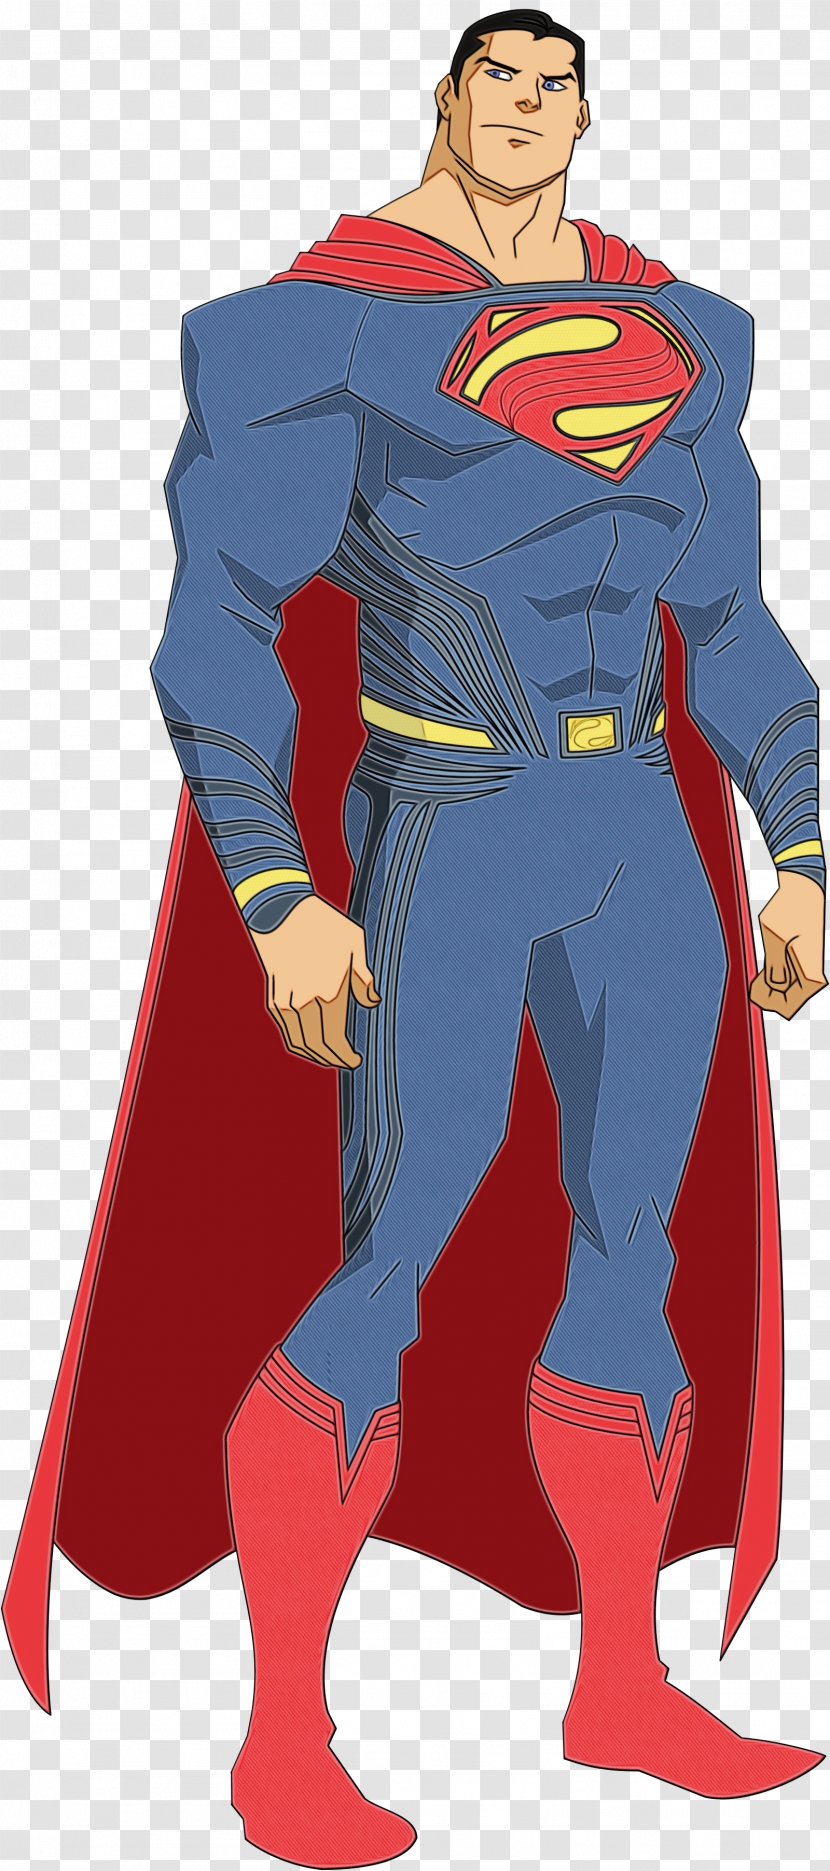 Superman Illustration Outerwear Cartoon Electric Blue - Fictional Character Transparent PNG